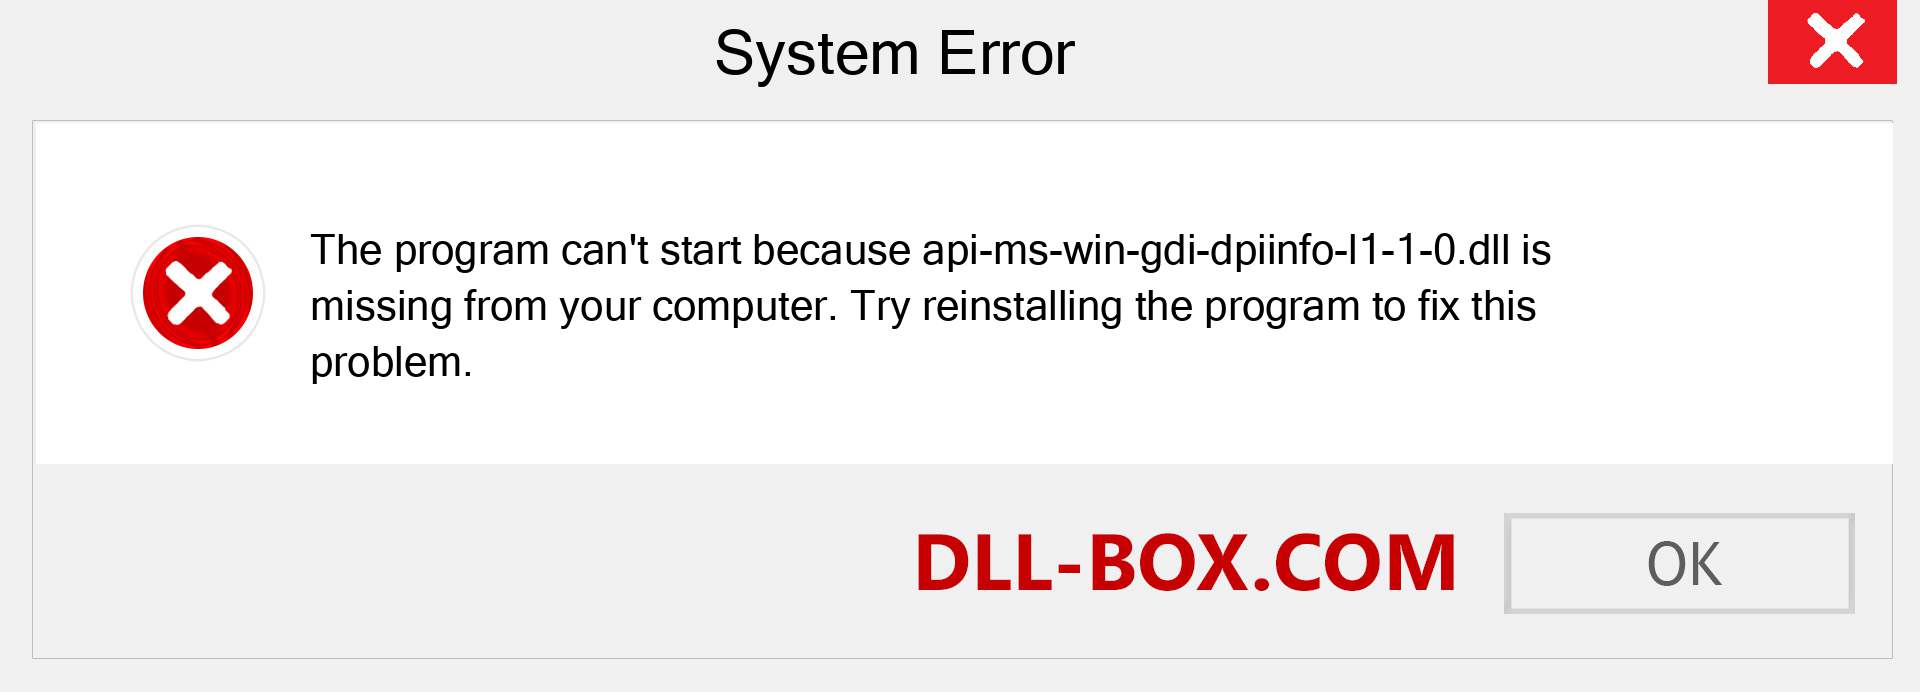  api-ms-win-gdi-dpiinfo-l1-1-0.dll file is missing?. Download for Windows 7, 8, 10 - Fix  api-ms-win-gdi-dpiinfo-l1-1-0 dll Missing Error on Windows, photos, images